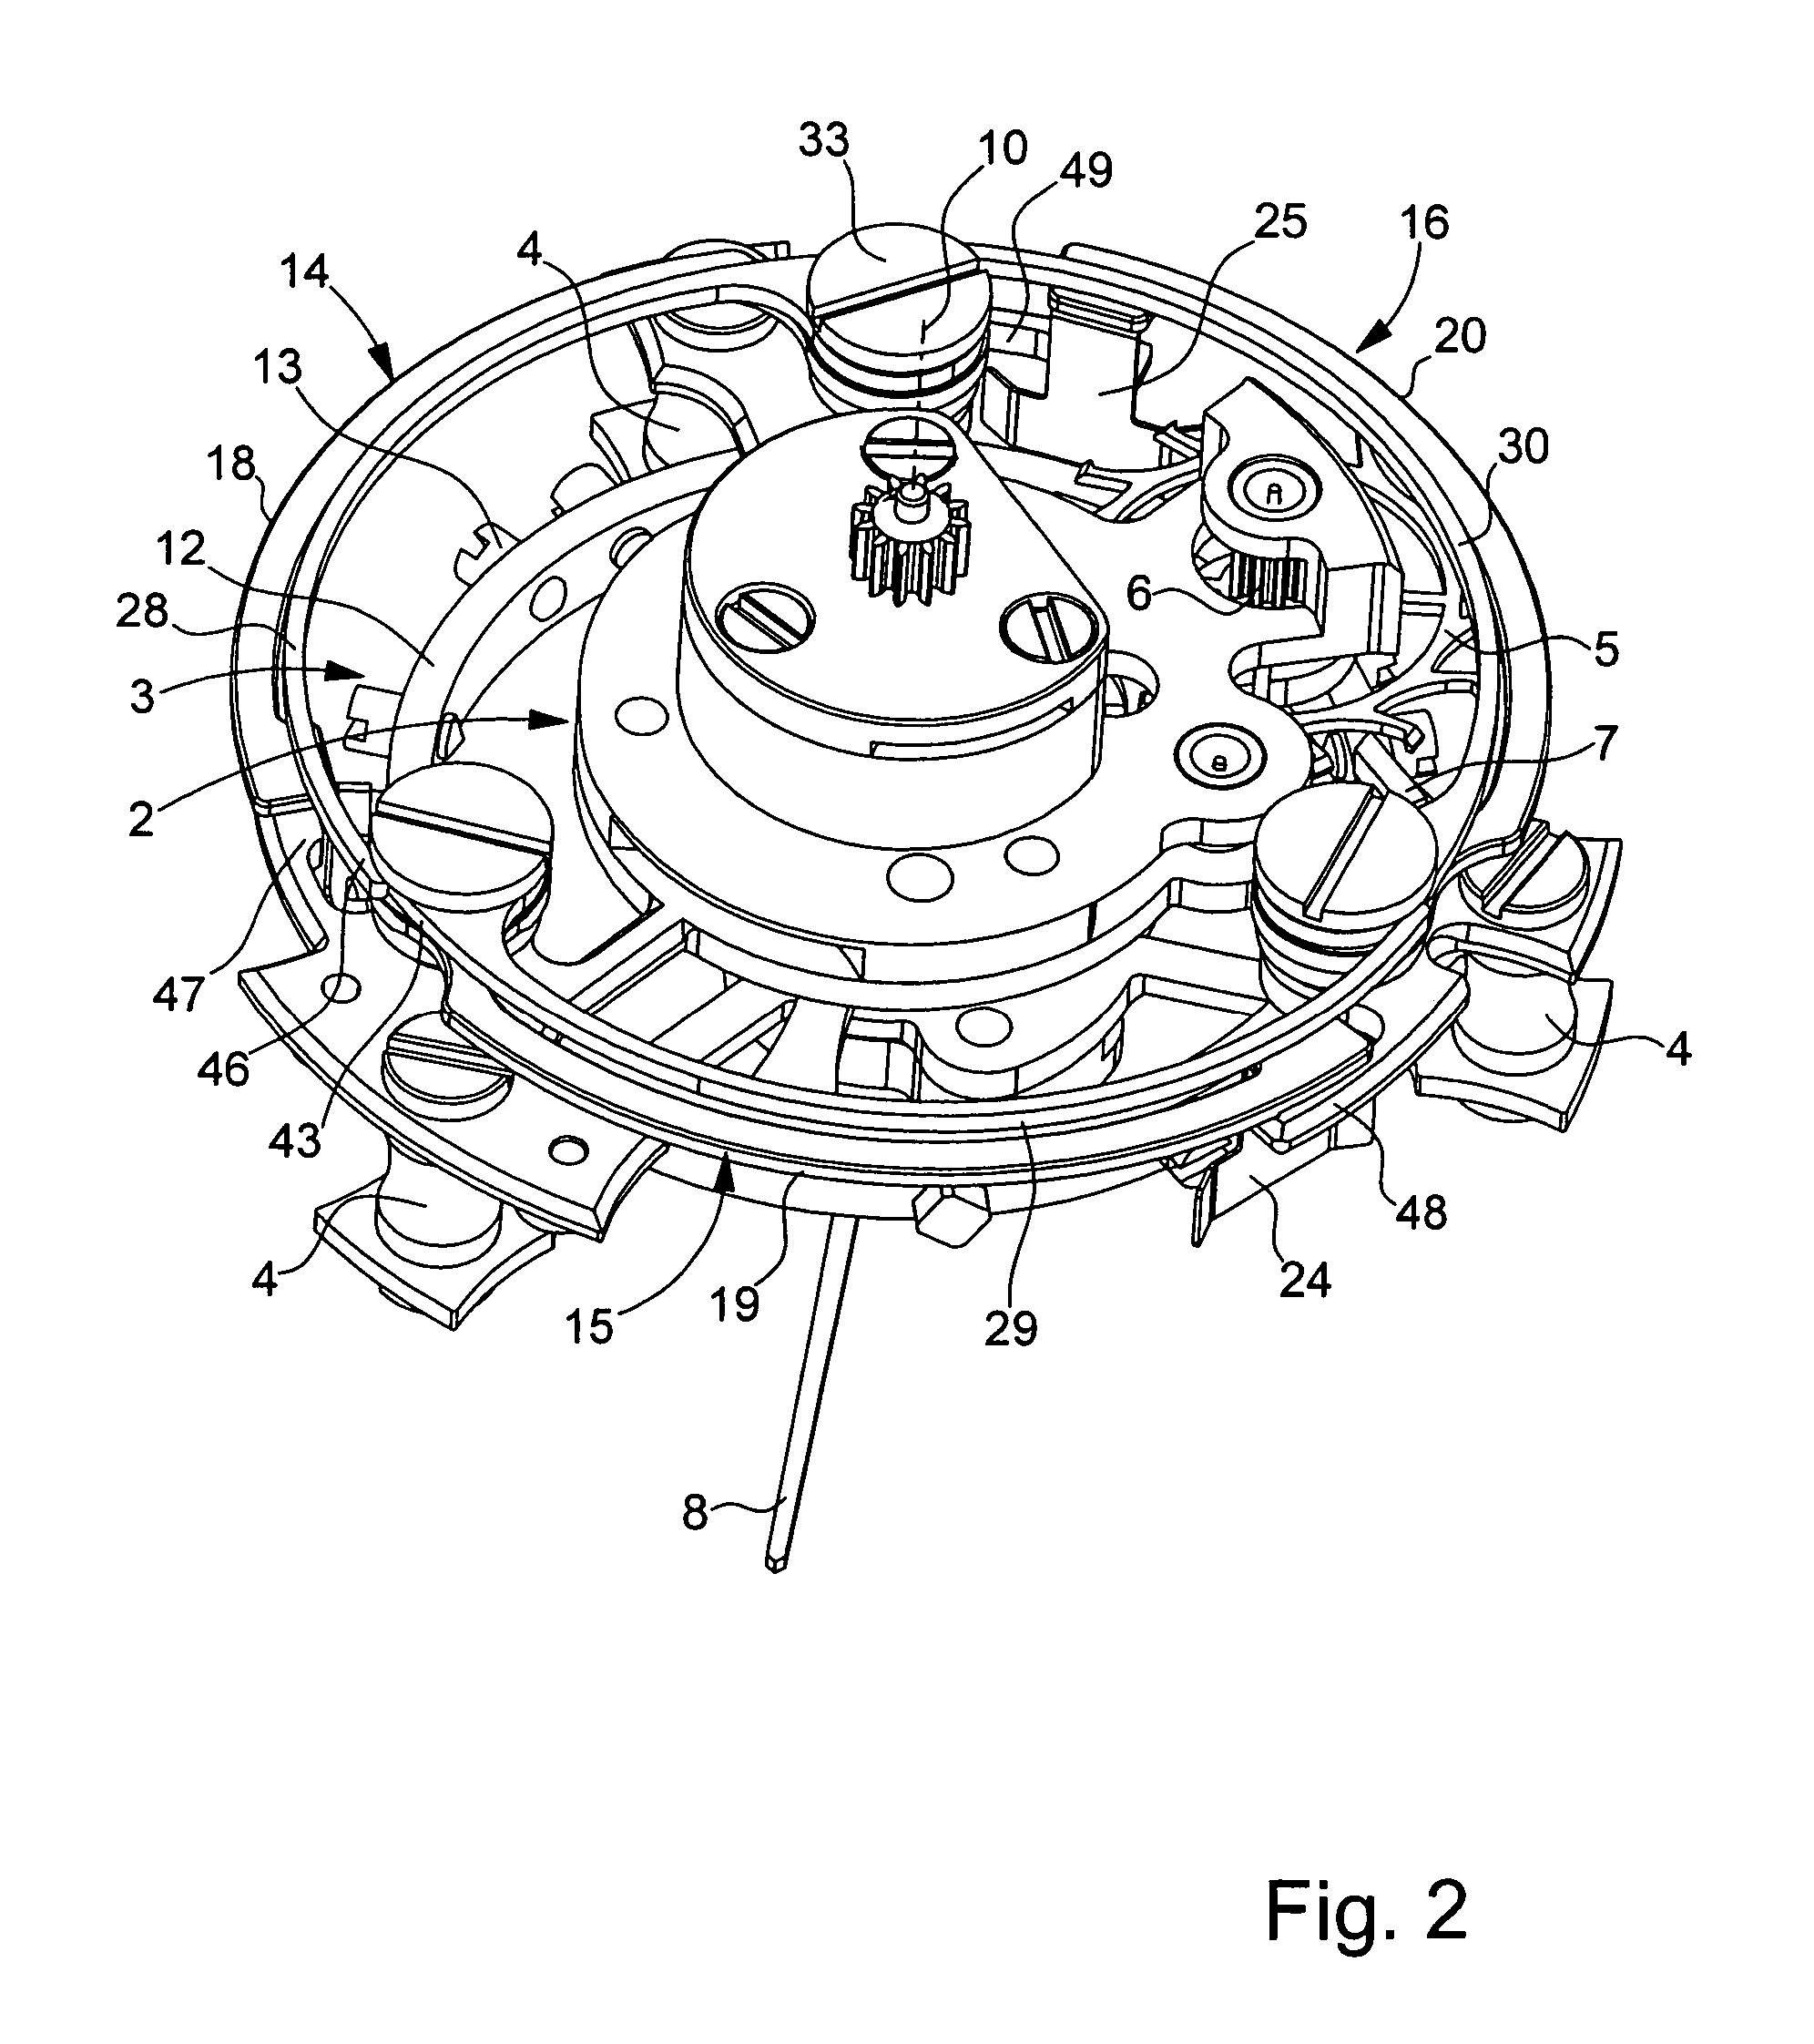 Device for stopping the balance during the time-setting of a tourbillon watch